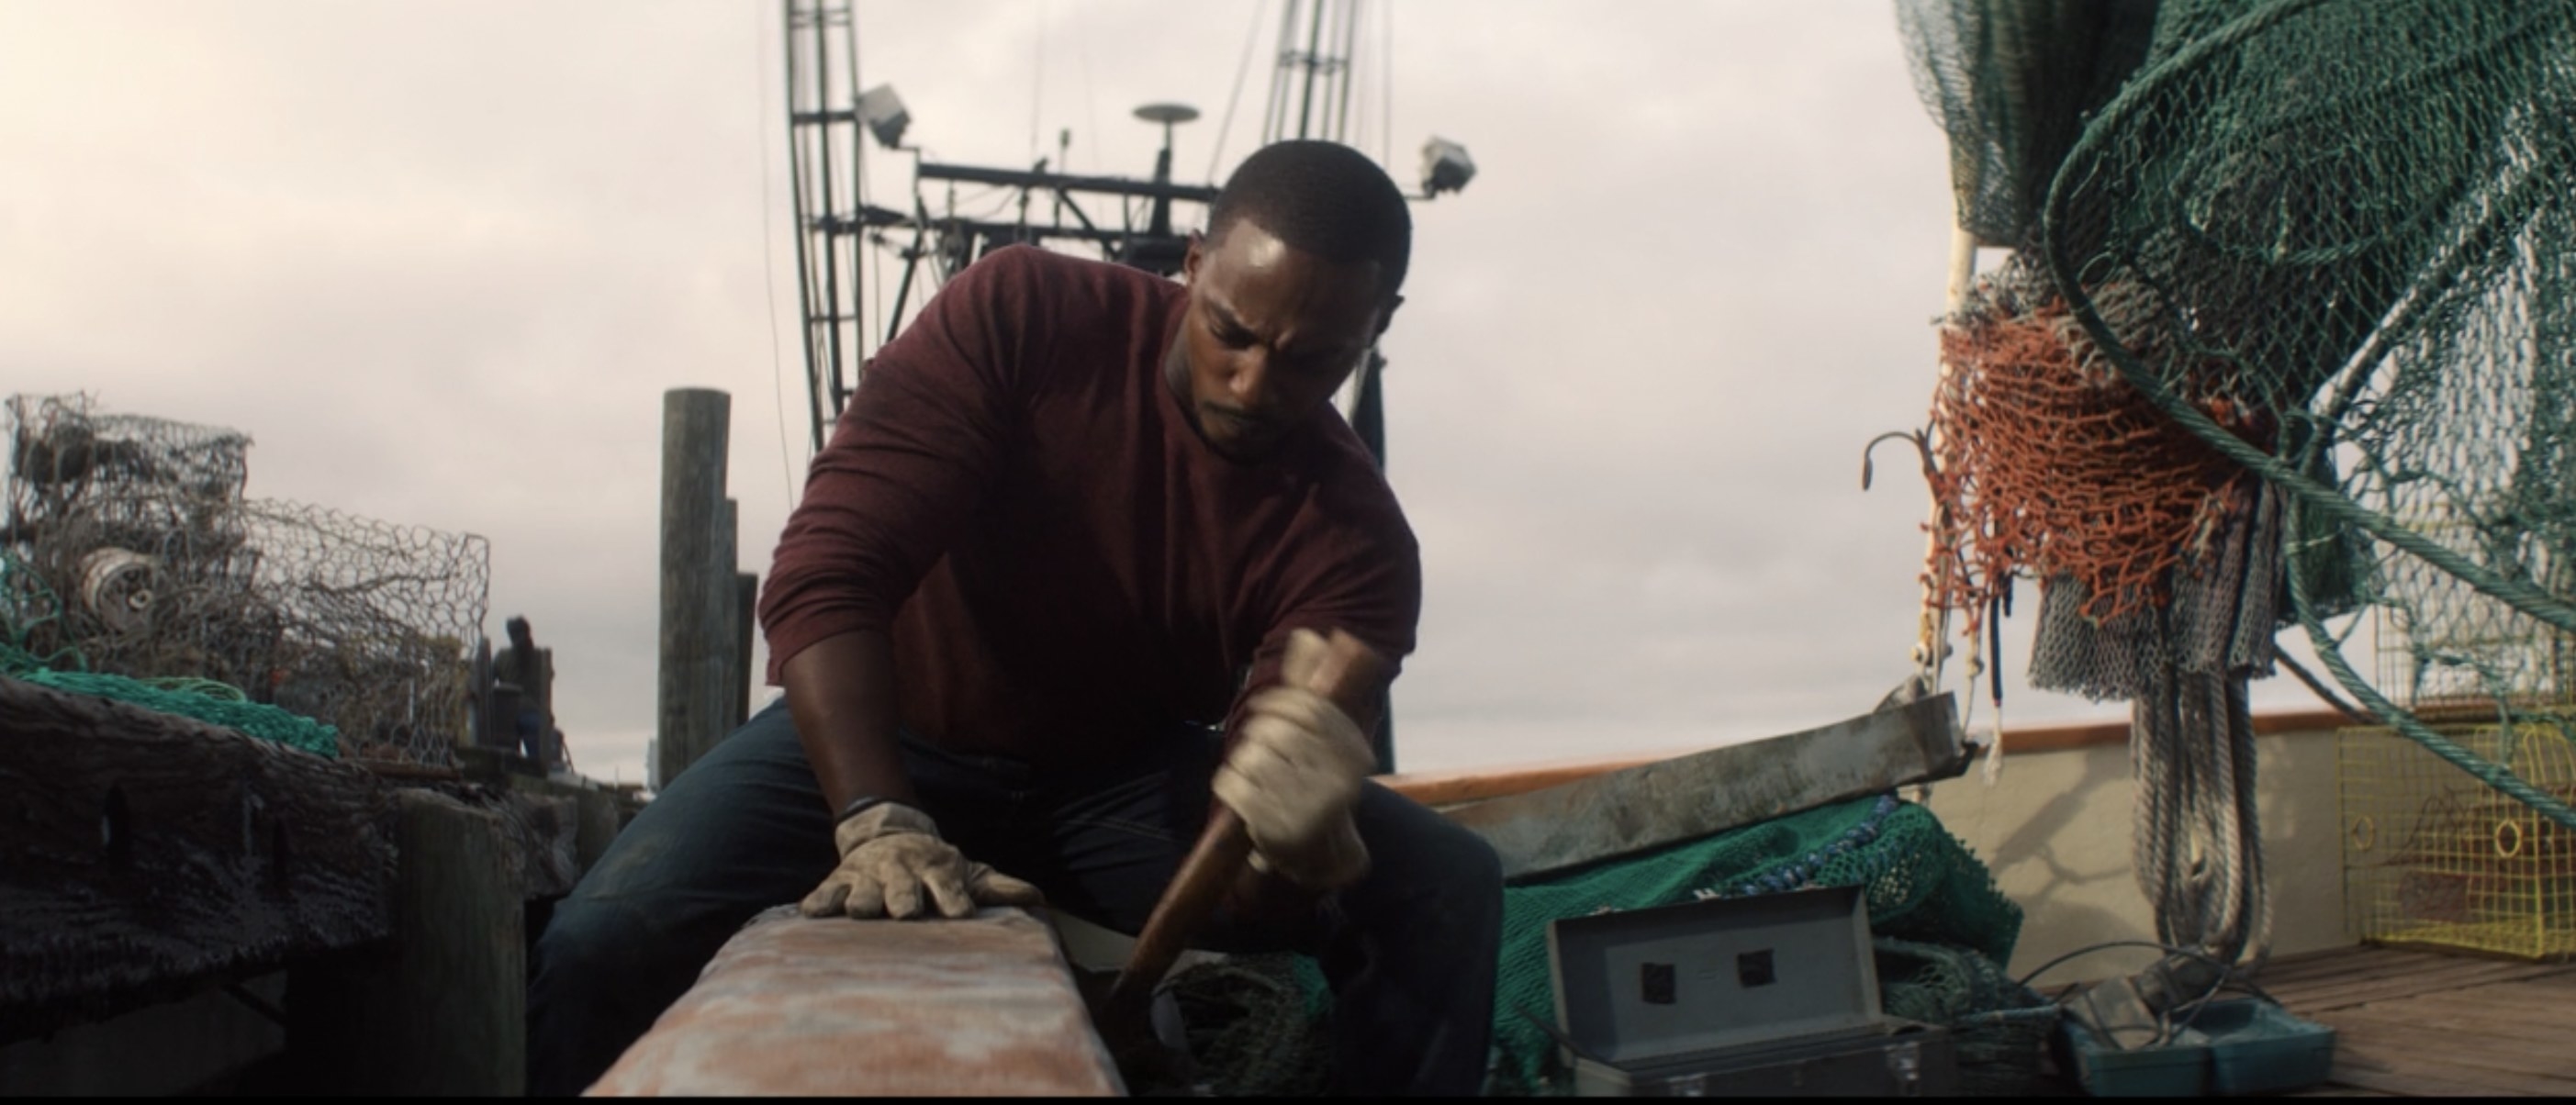 Sam Wilson helps fix the family boat